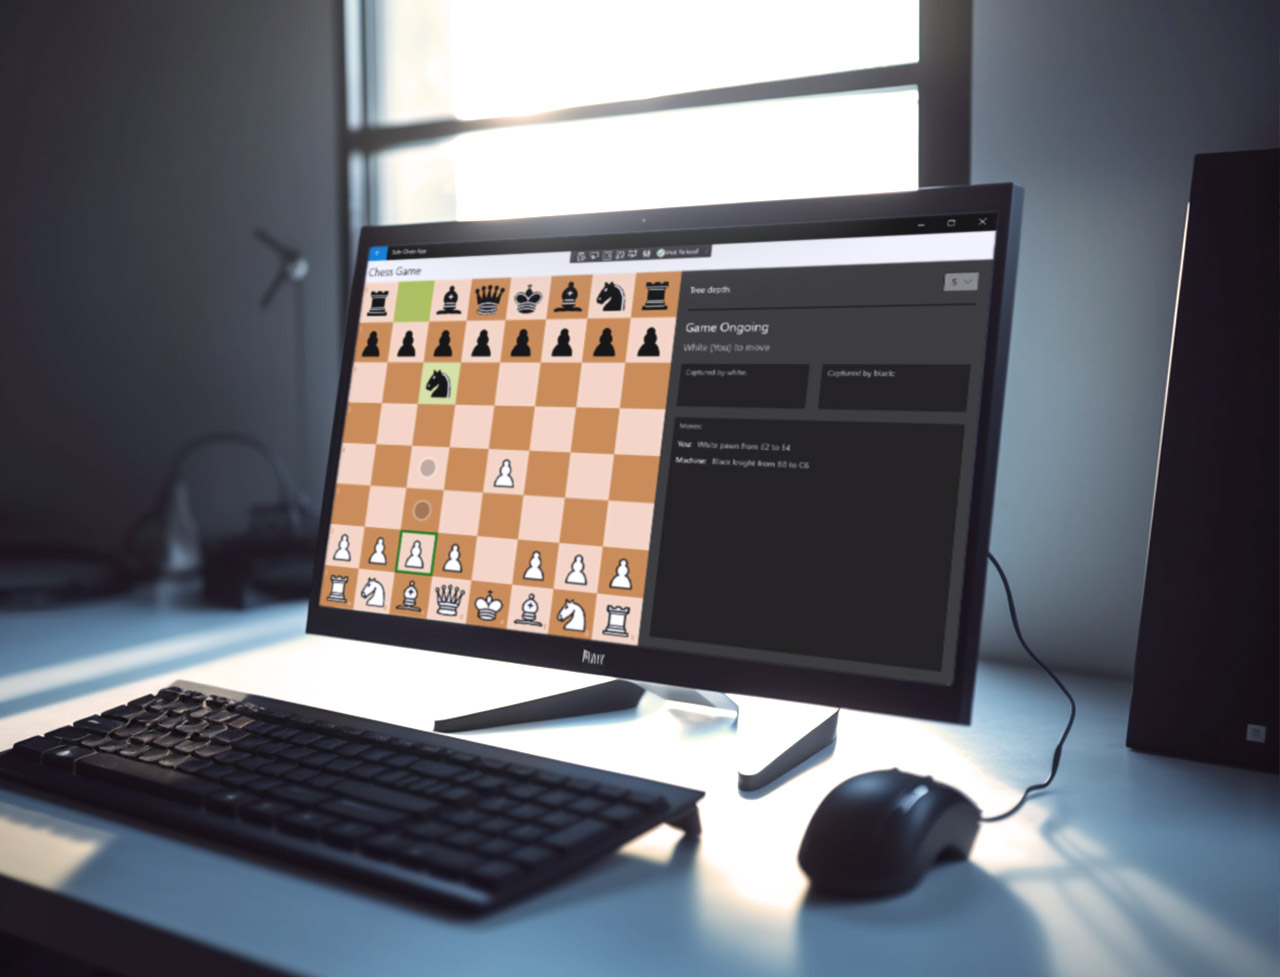 Image of my chess game created from scratch